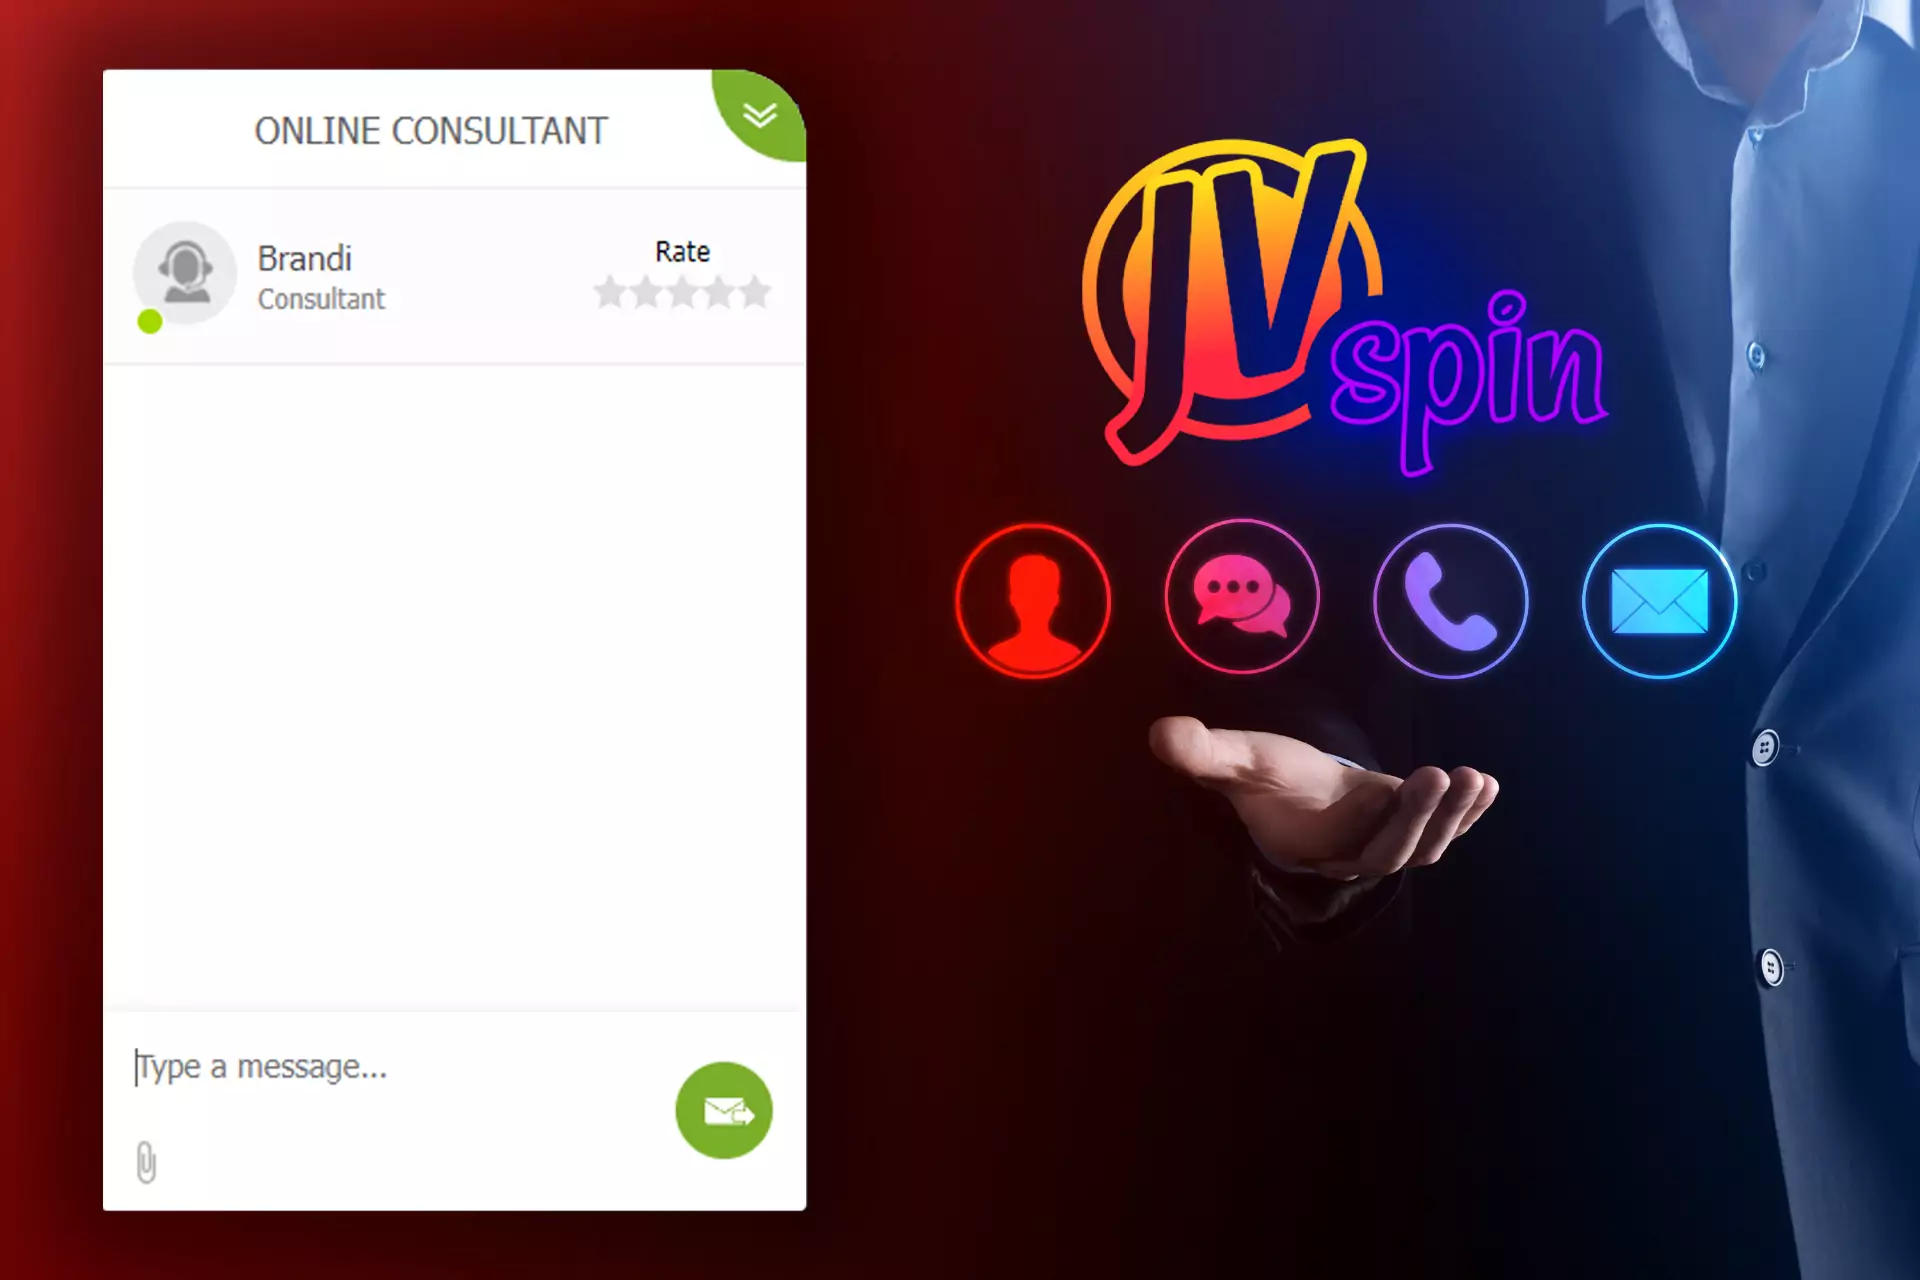 We recommend you to use the Online Chat for contacting Customer Support.